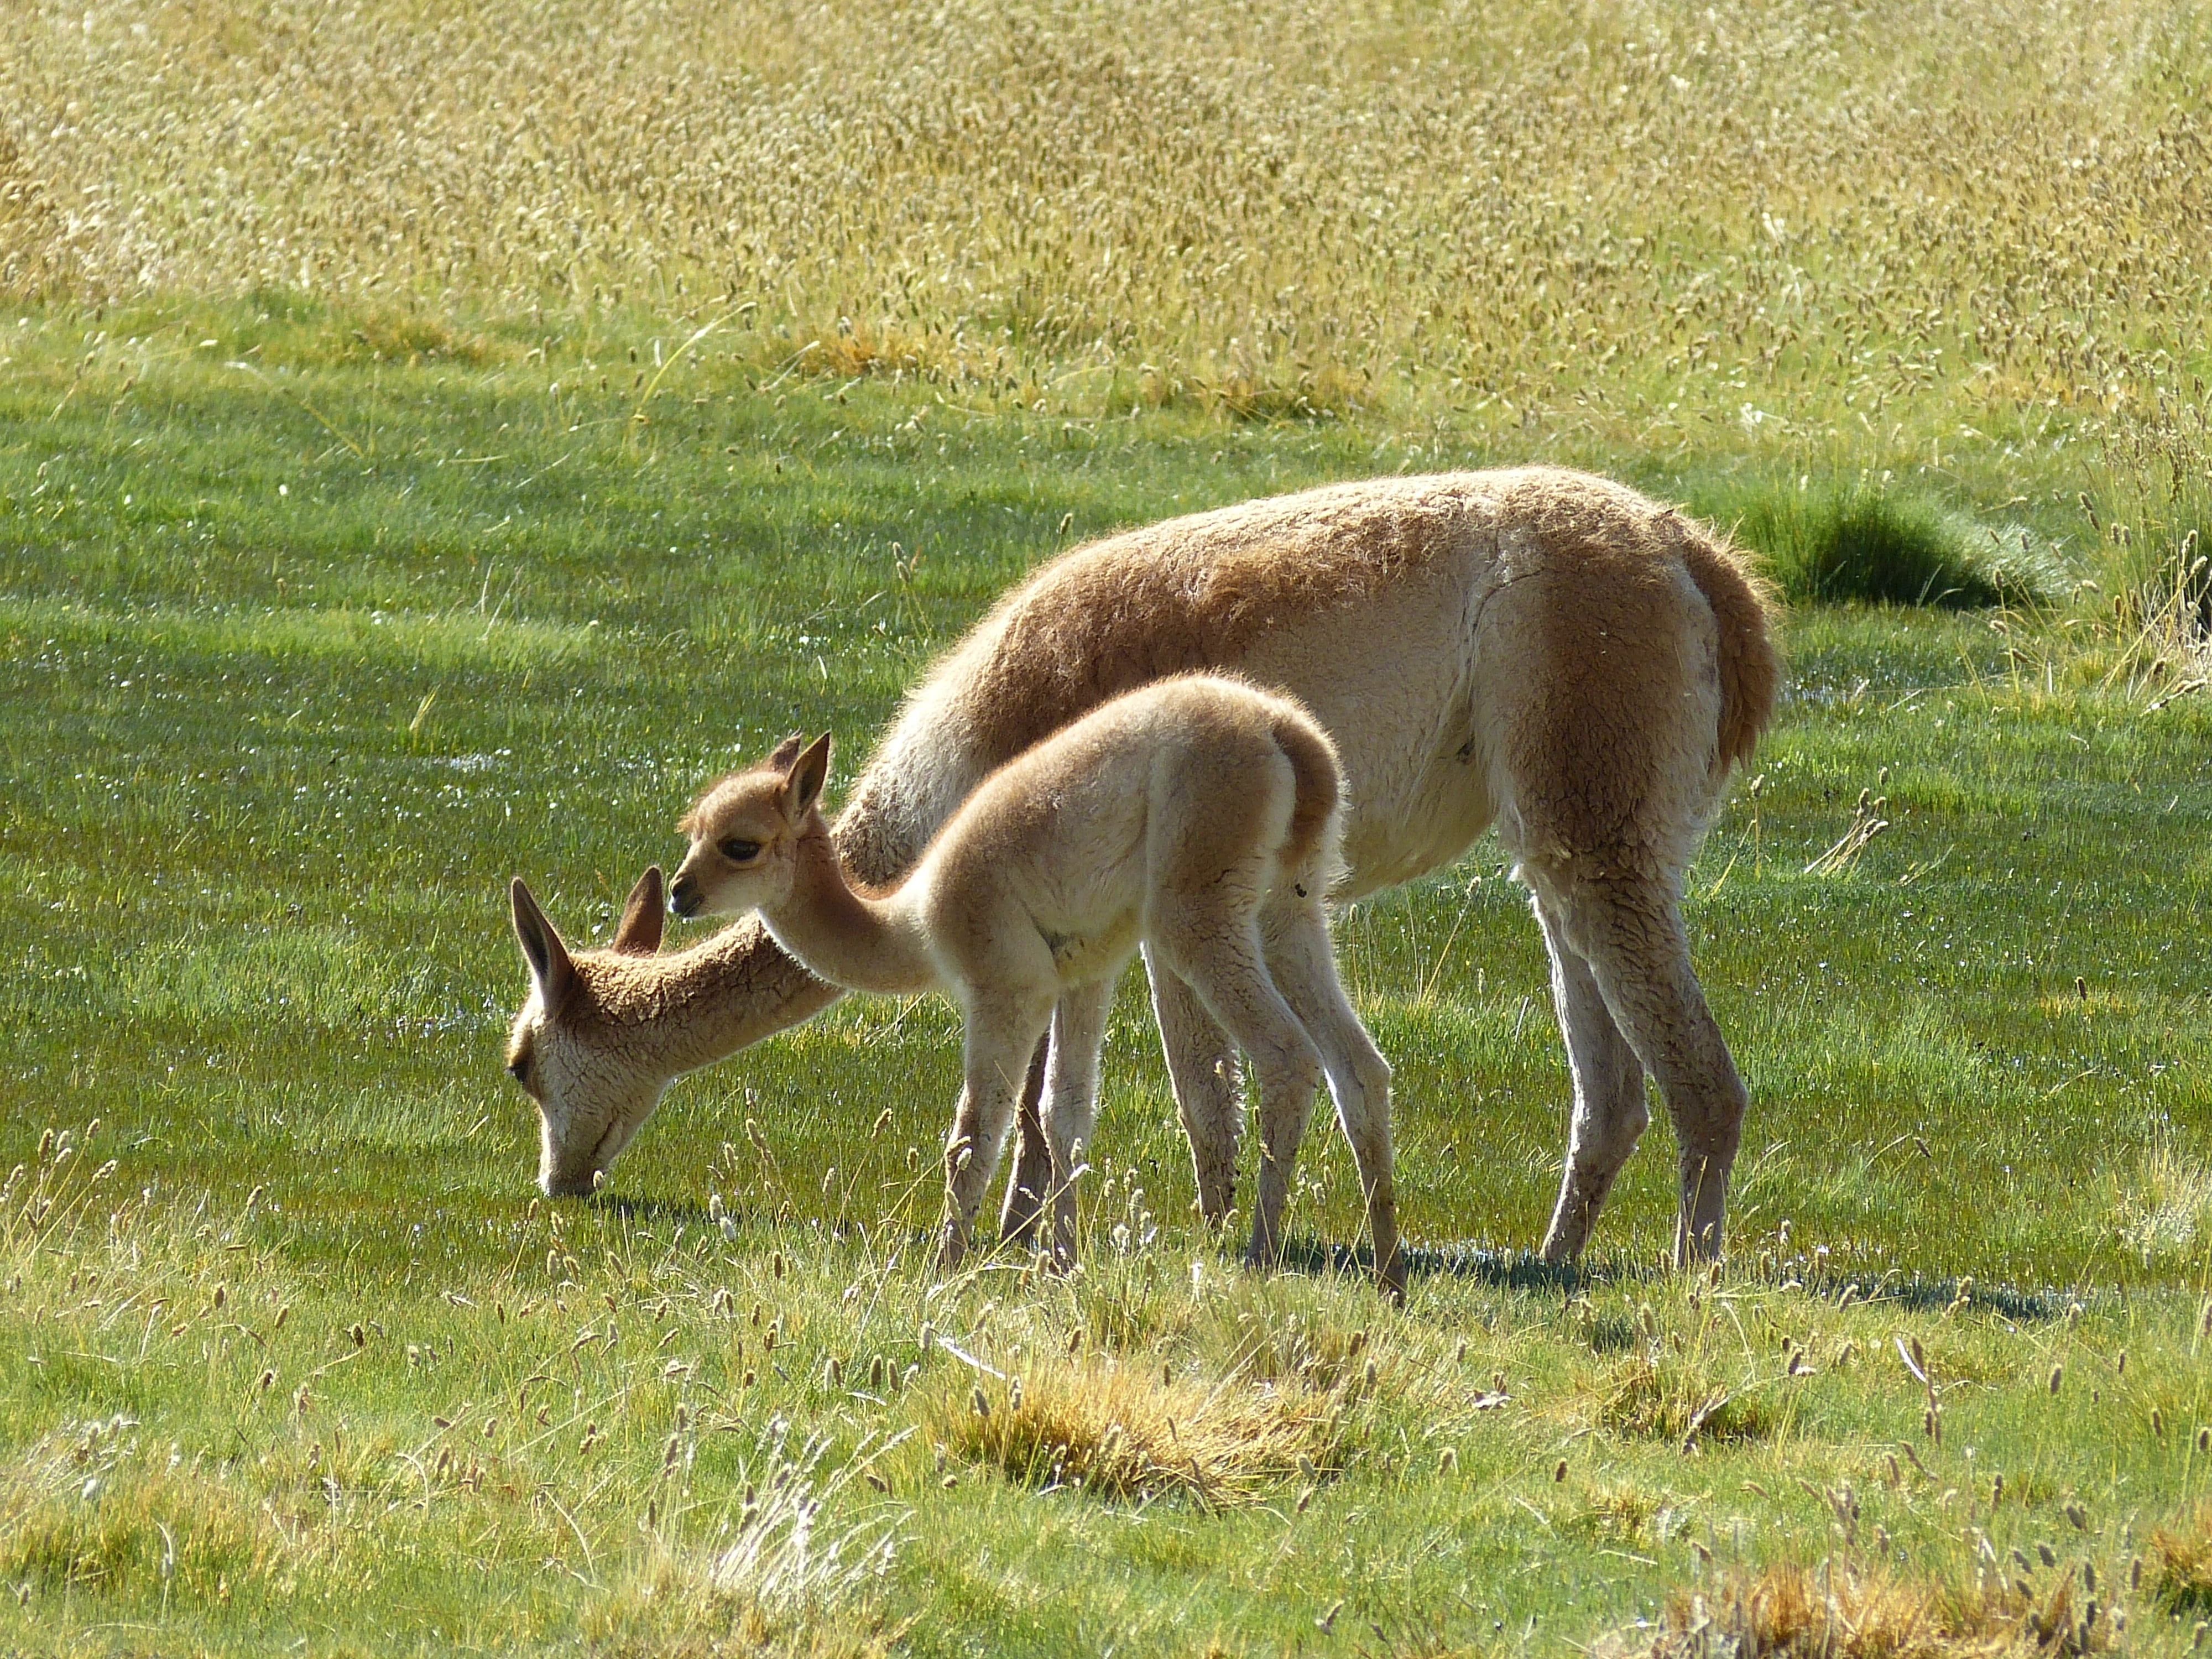 white and brown deers on green grass field during daytime, chile